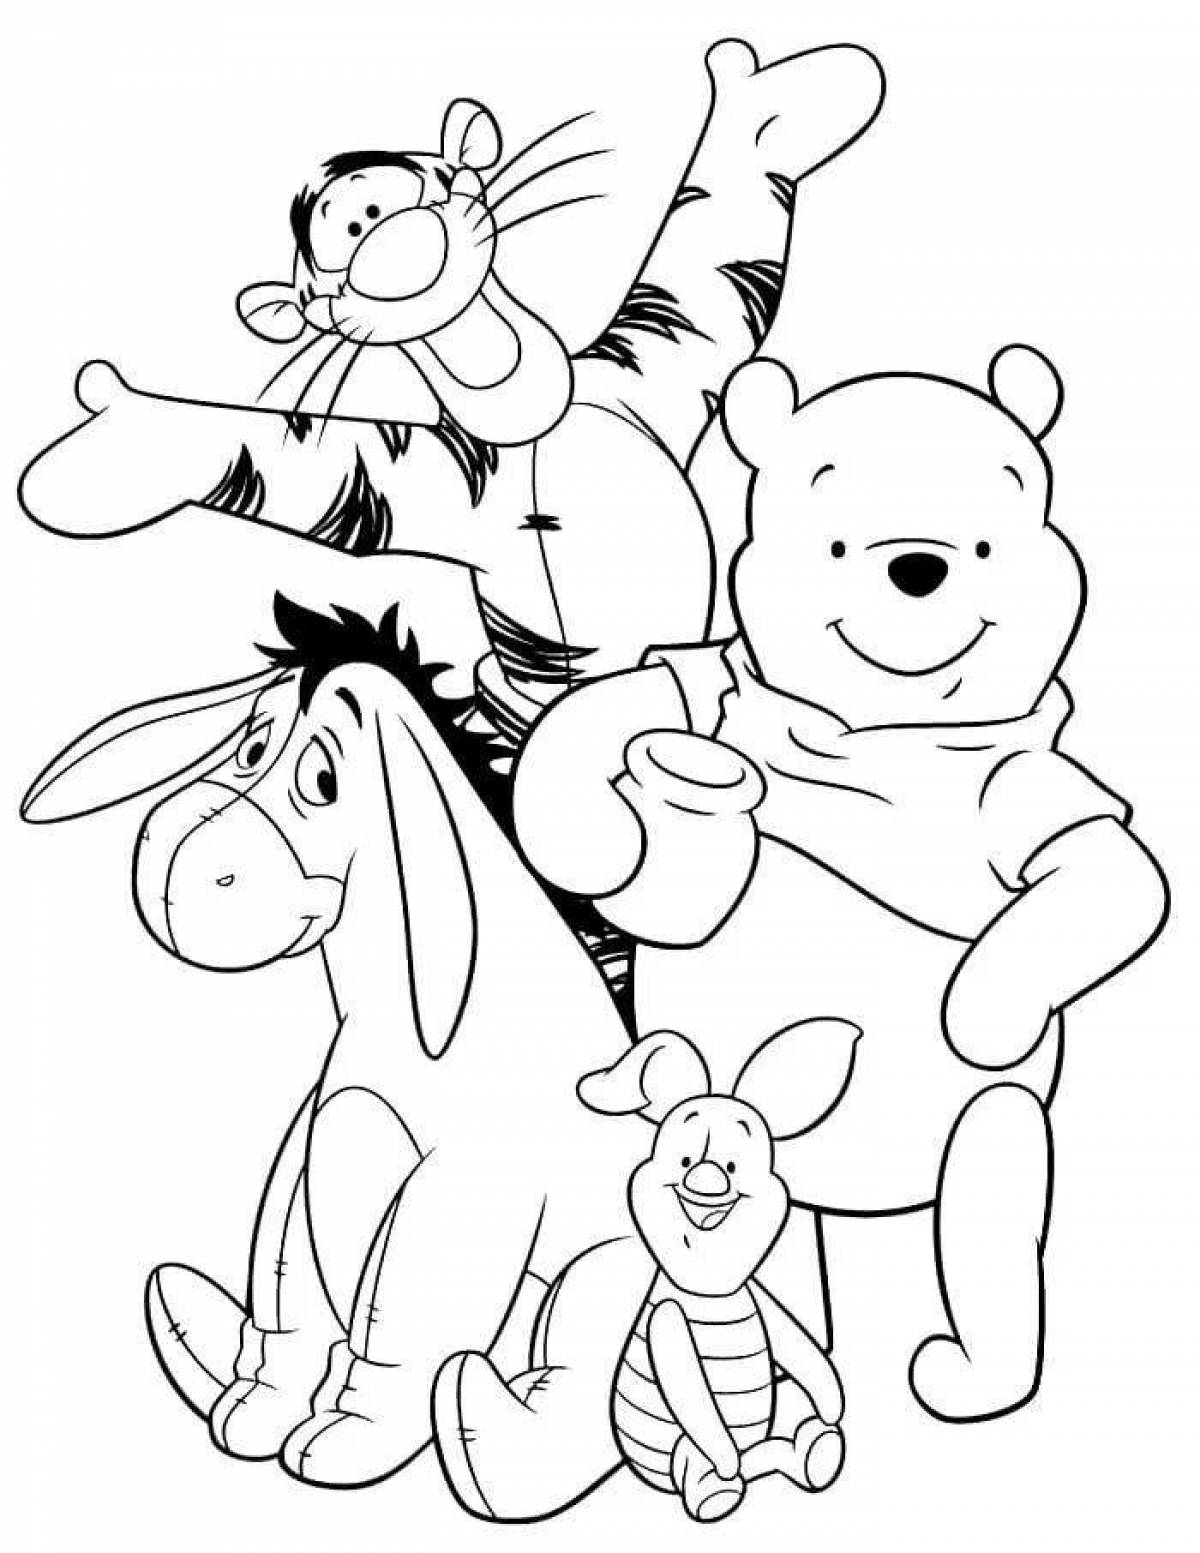 Winnie's funny coloring book